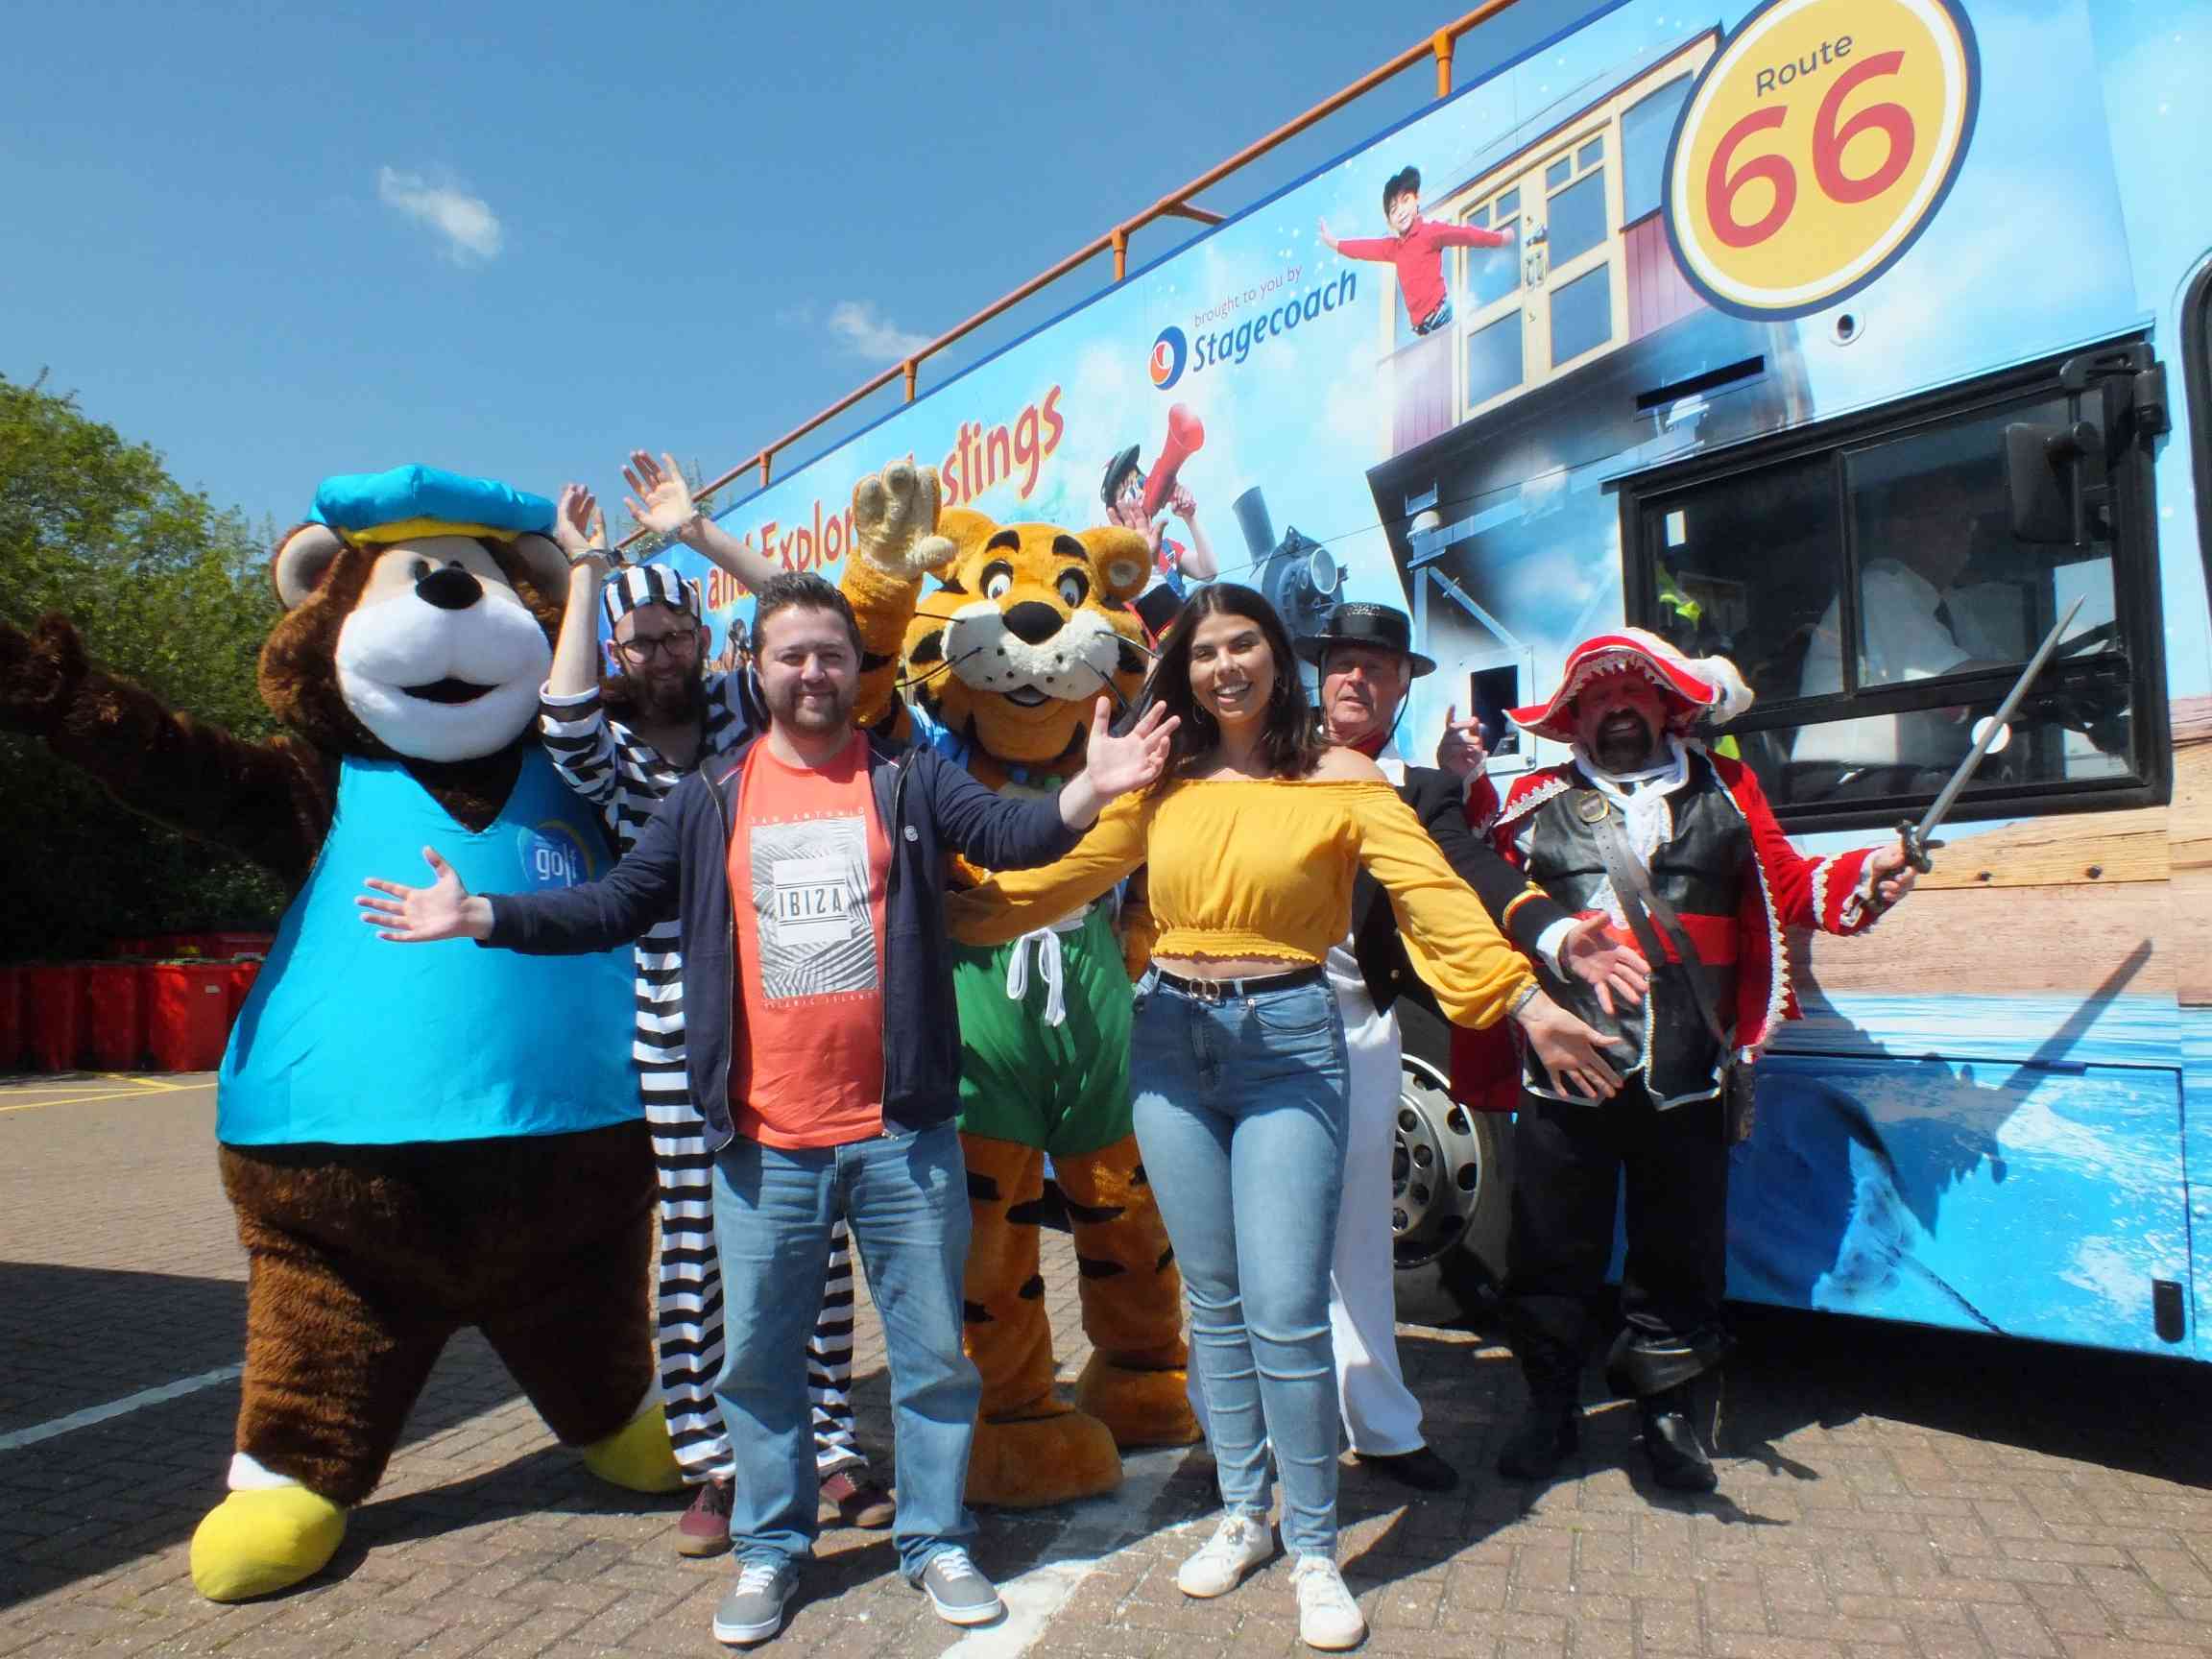 Open Top Bus Promotional Film Hits The High Notes In Hastings